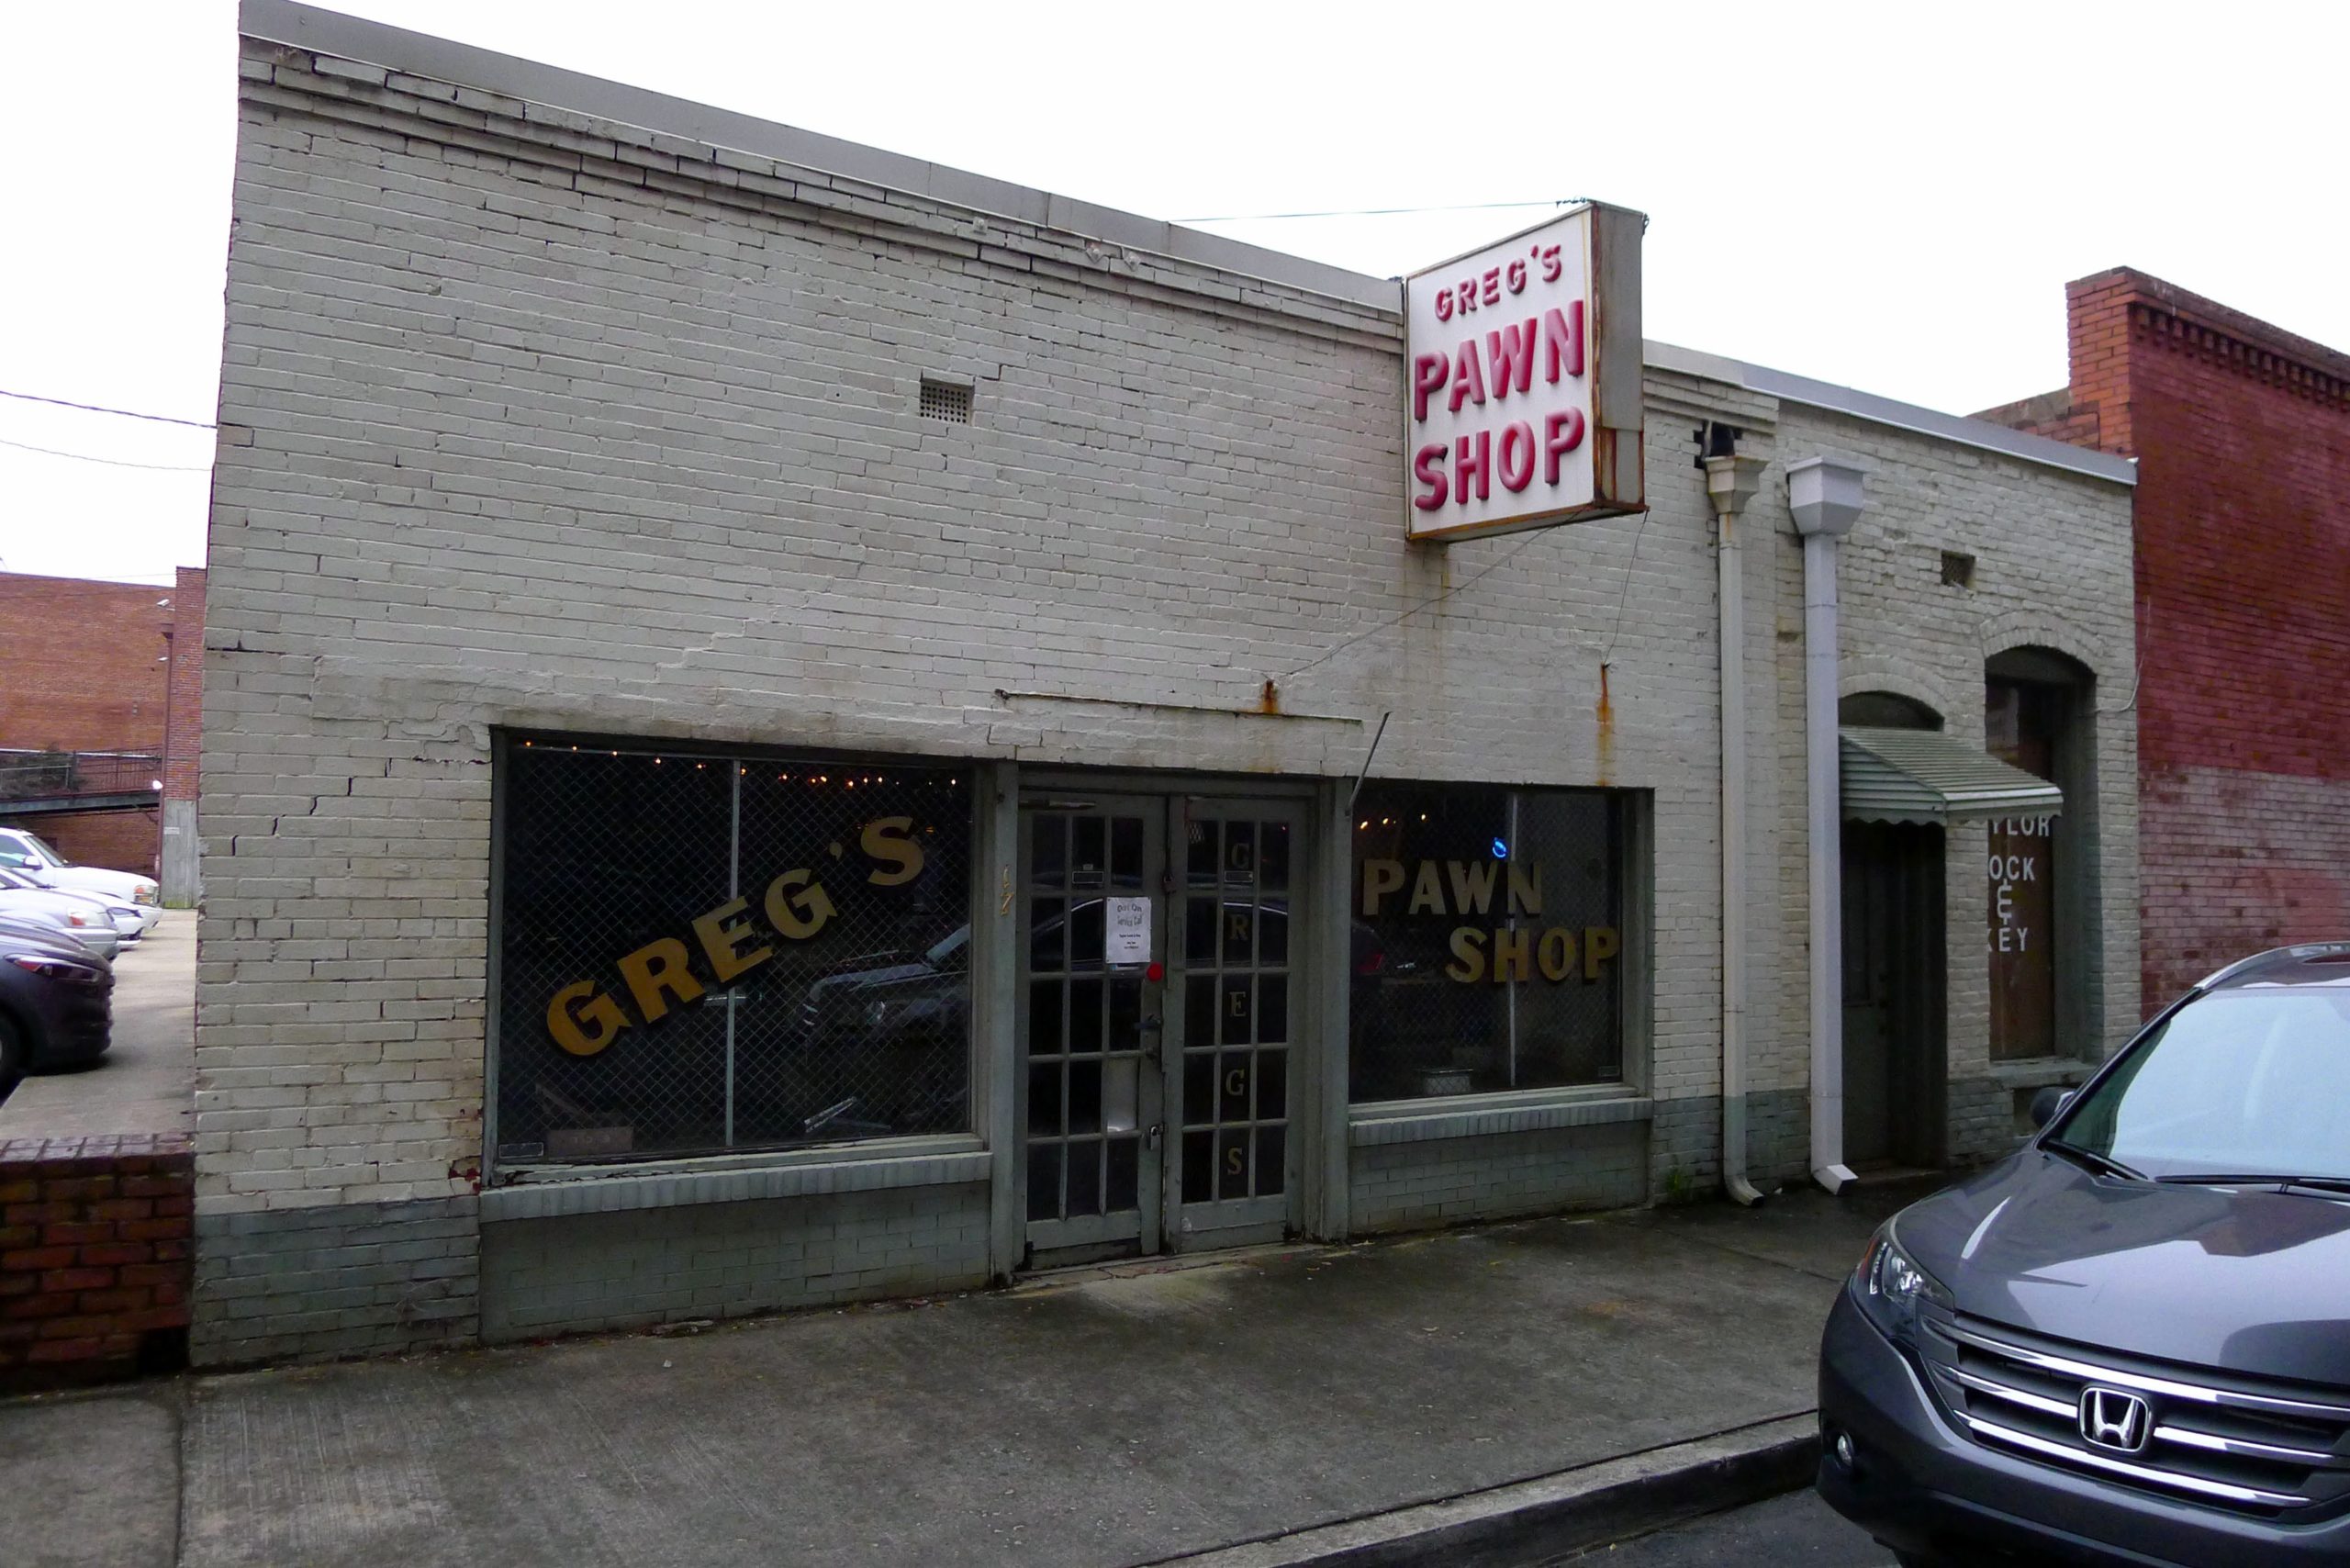 A shop called Greg's Pawn Shop stands in a street.